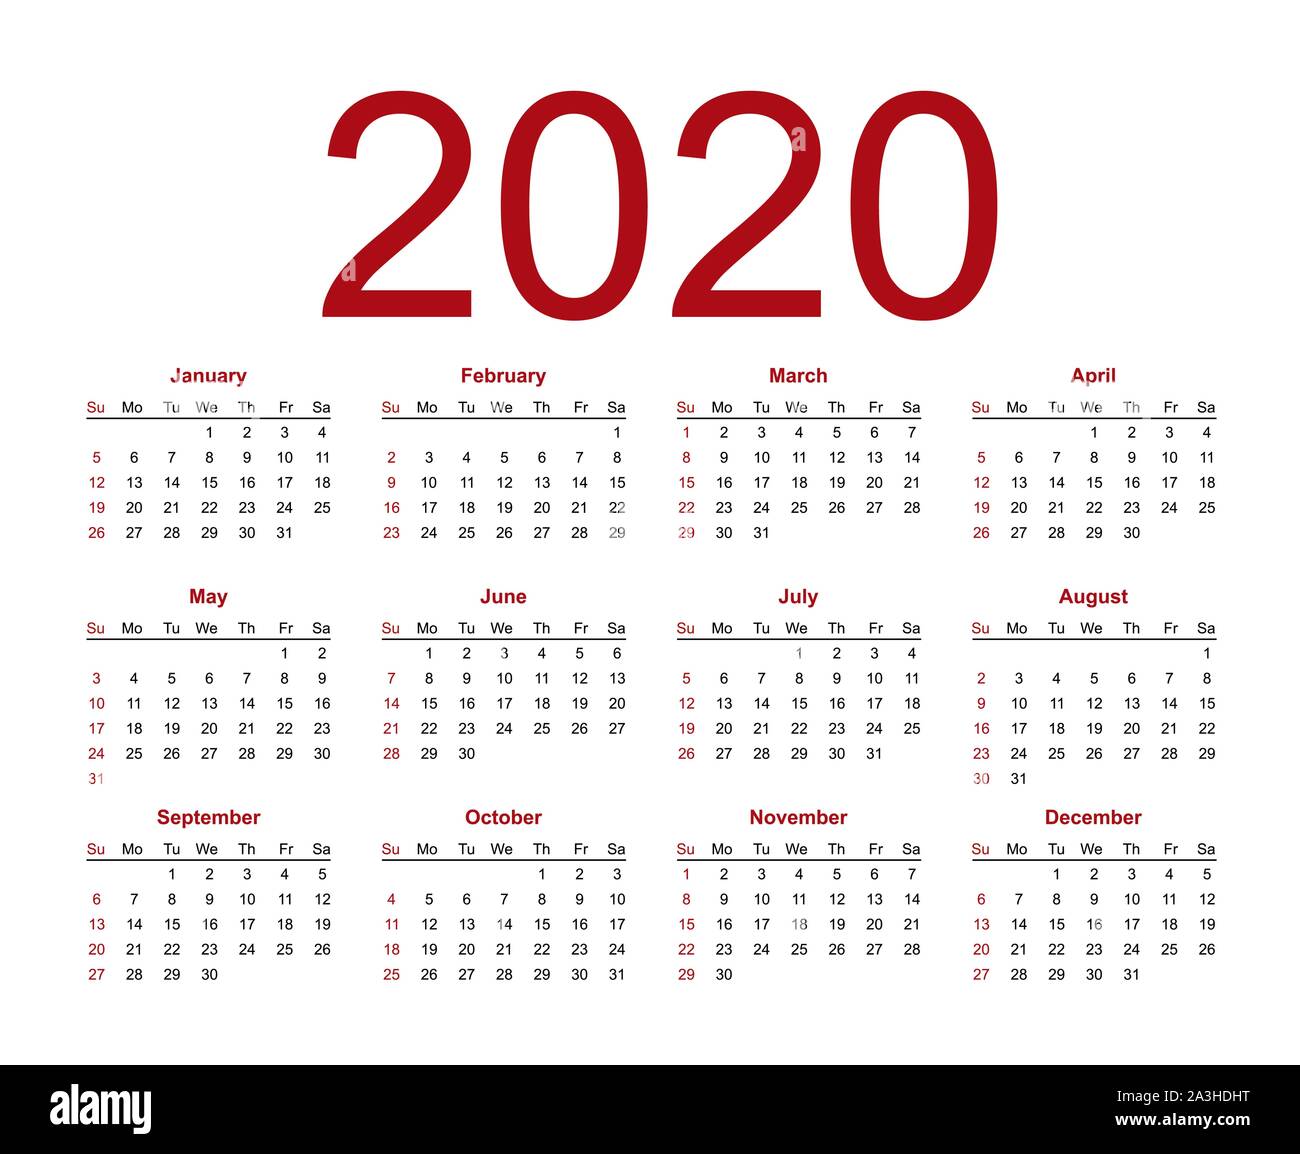 Calendar template for 2020 year. Week starts from Sunday. Isolated ...